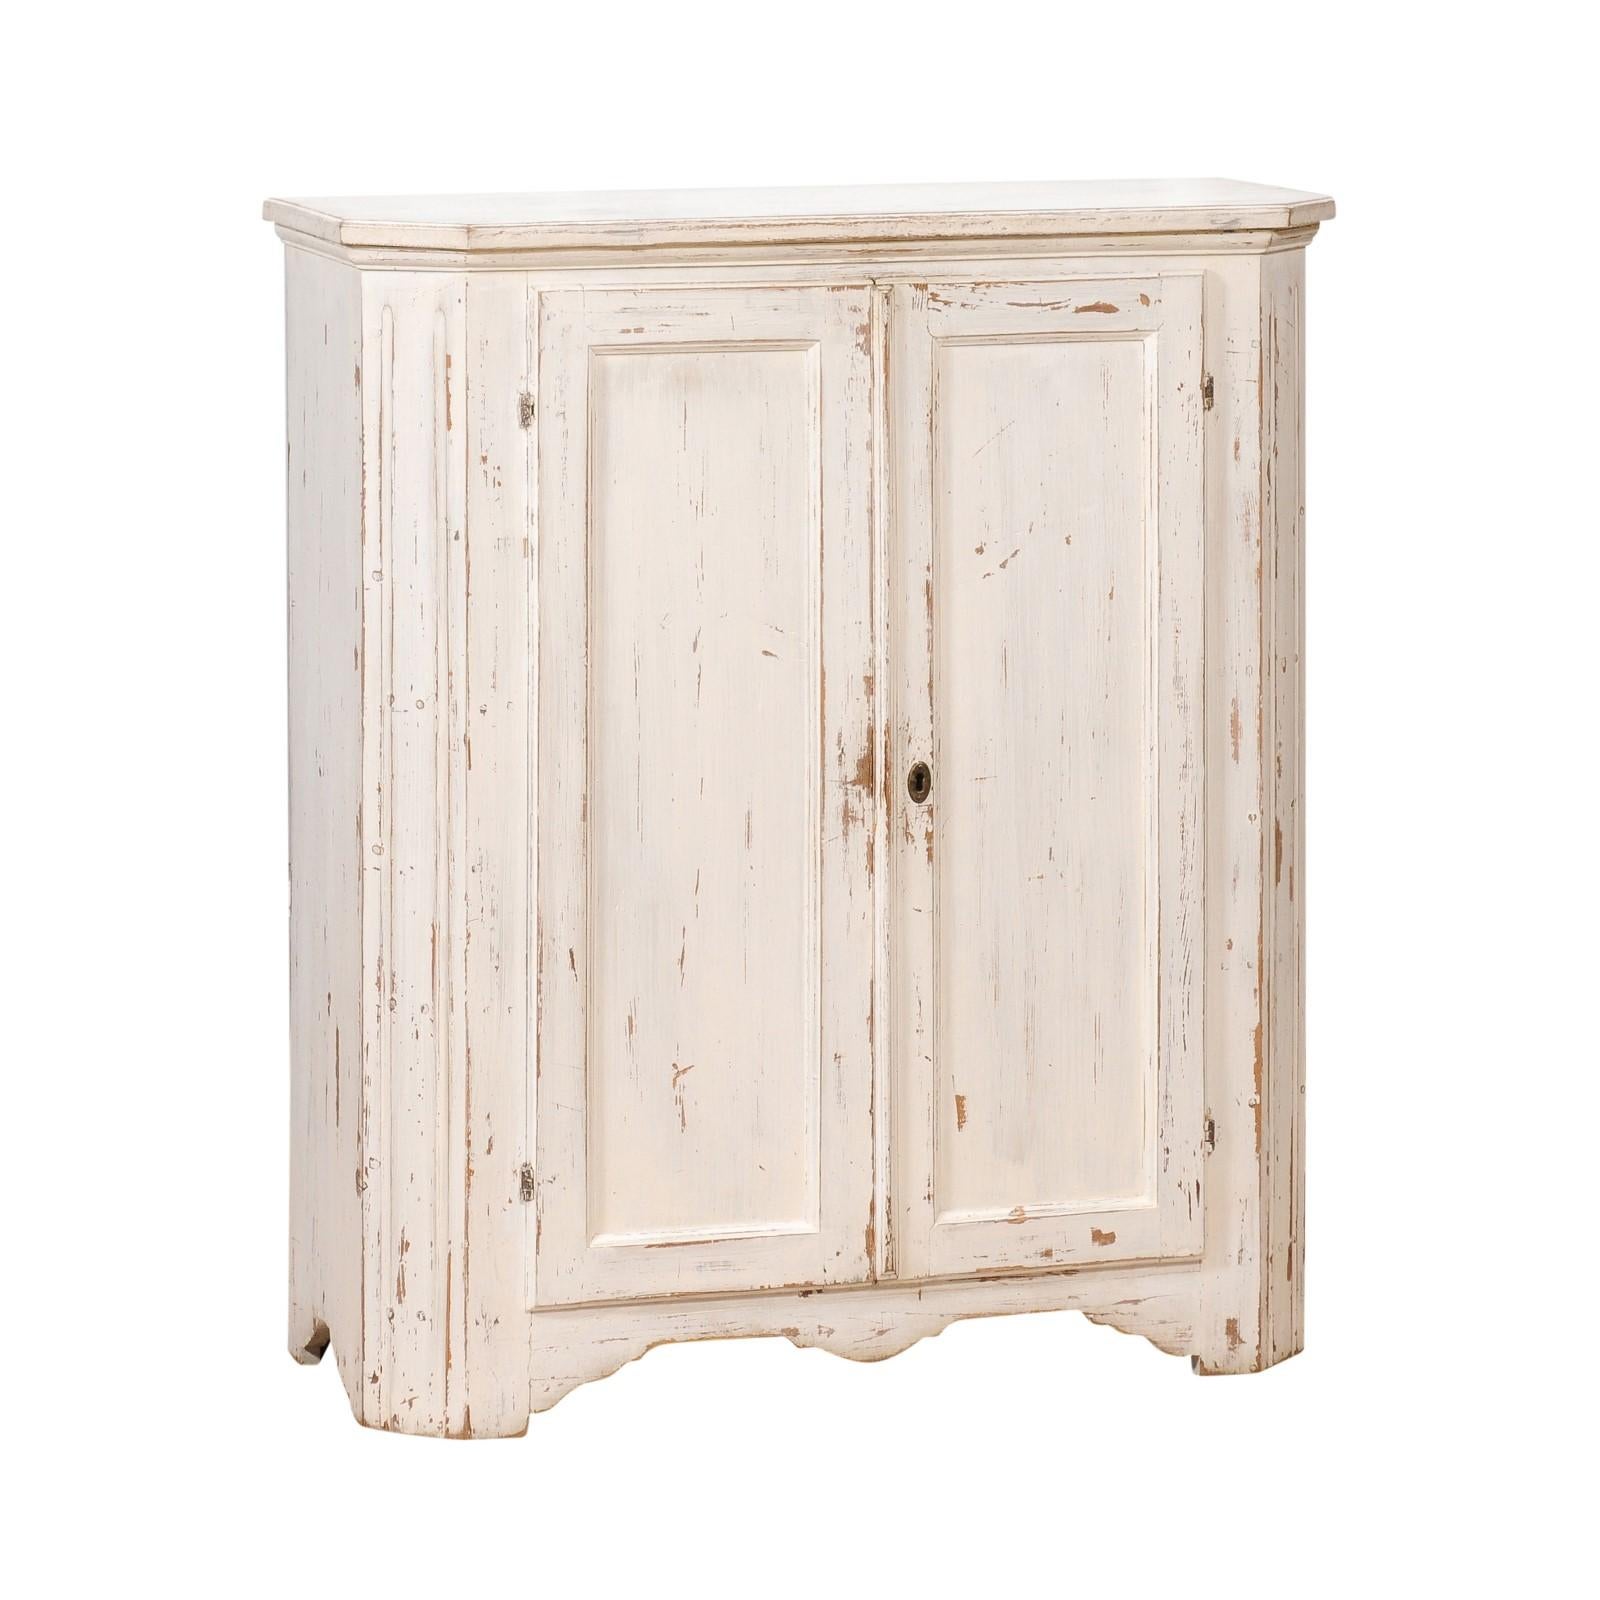 1830s Swedish Off-White Painted Wood Narrow Sideboard with Distressed Finish For Sale 8